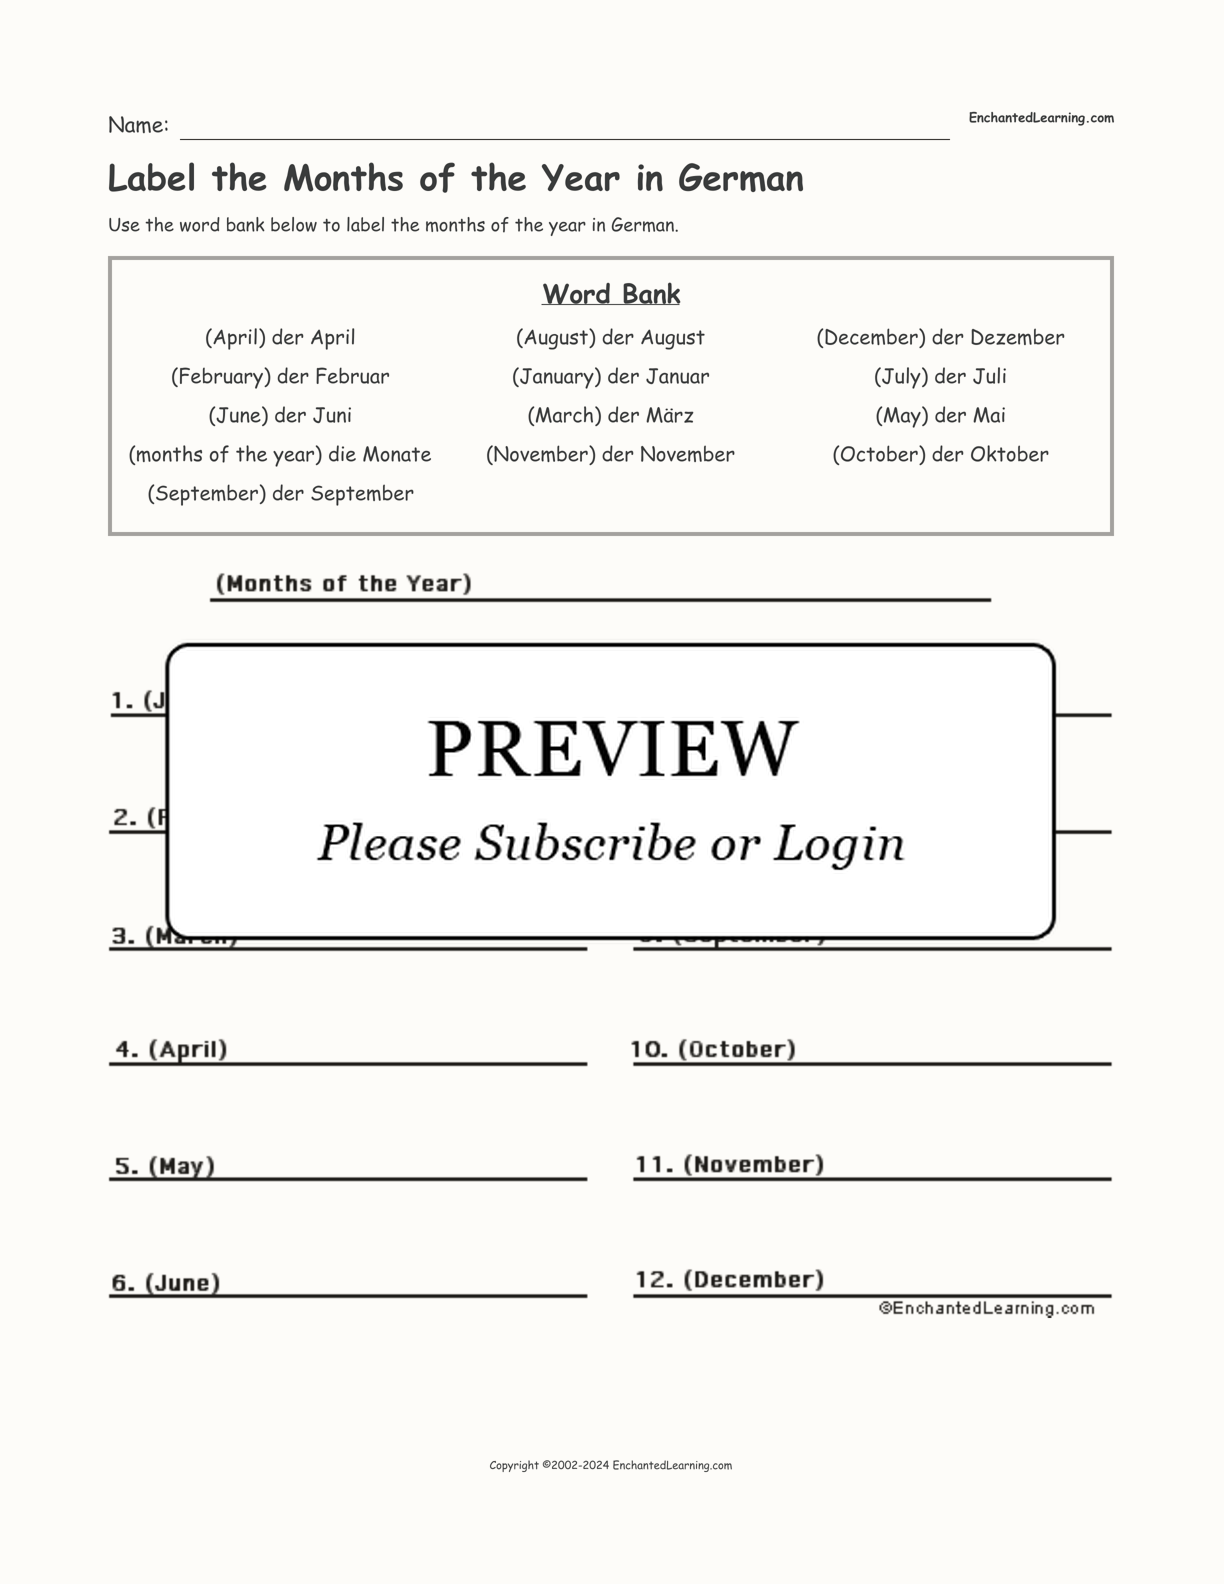 Label the Months of the Year in German interactive worksheet page 1